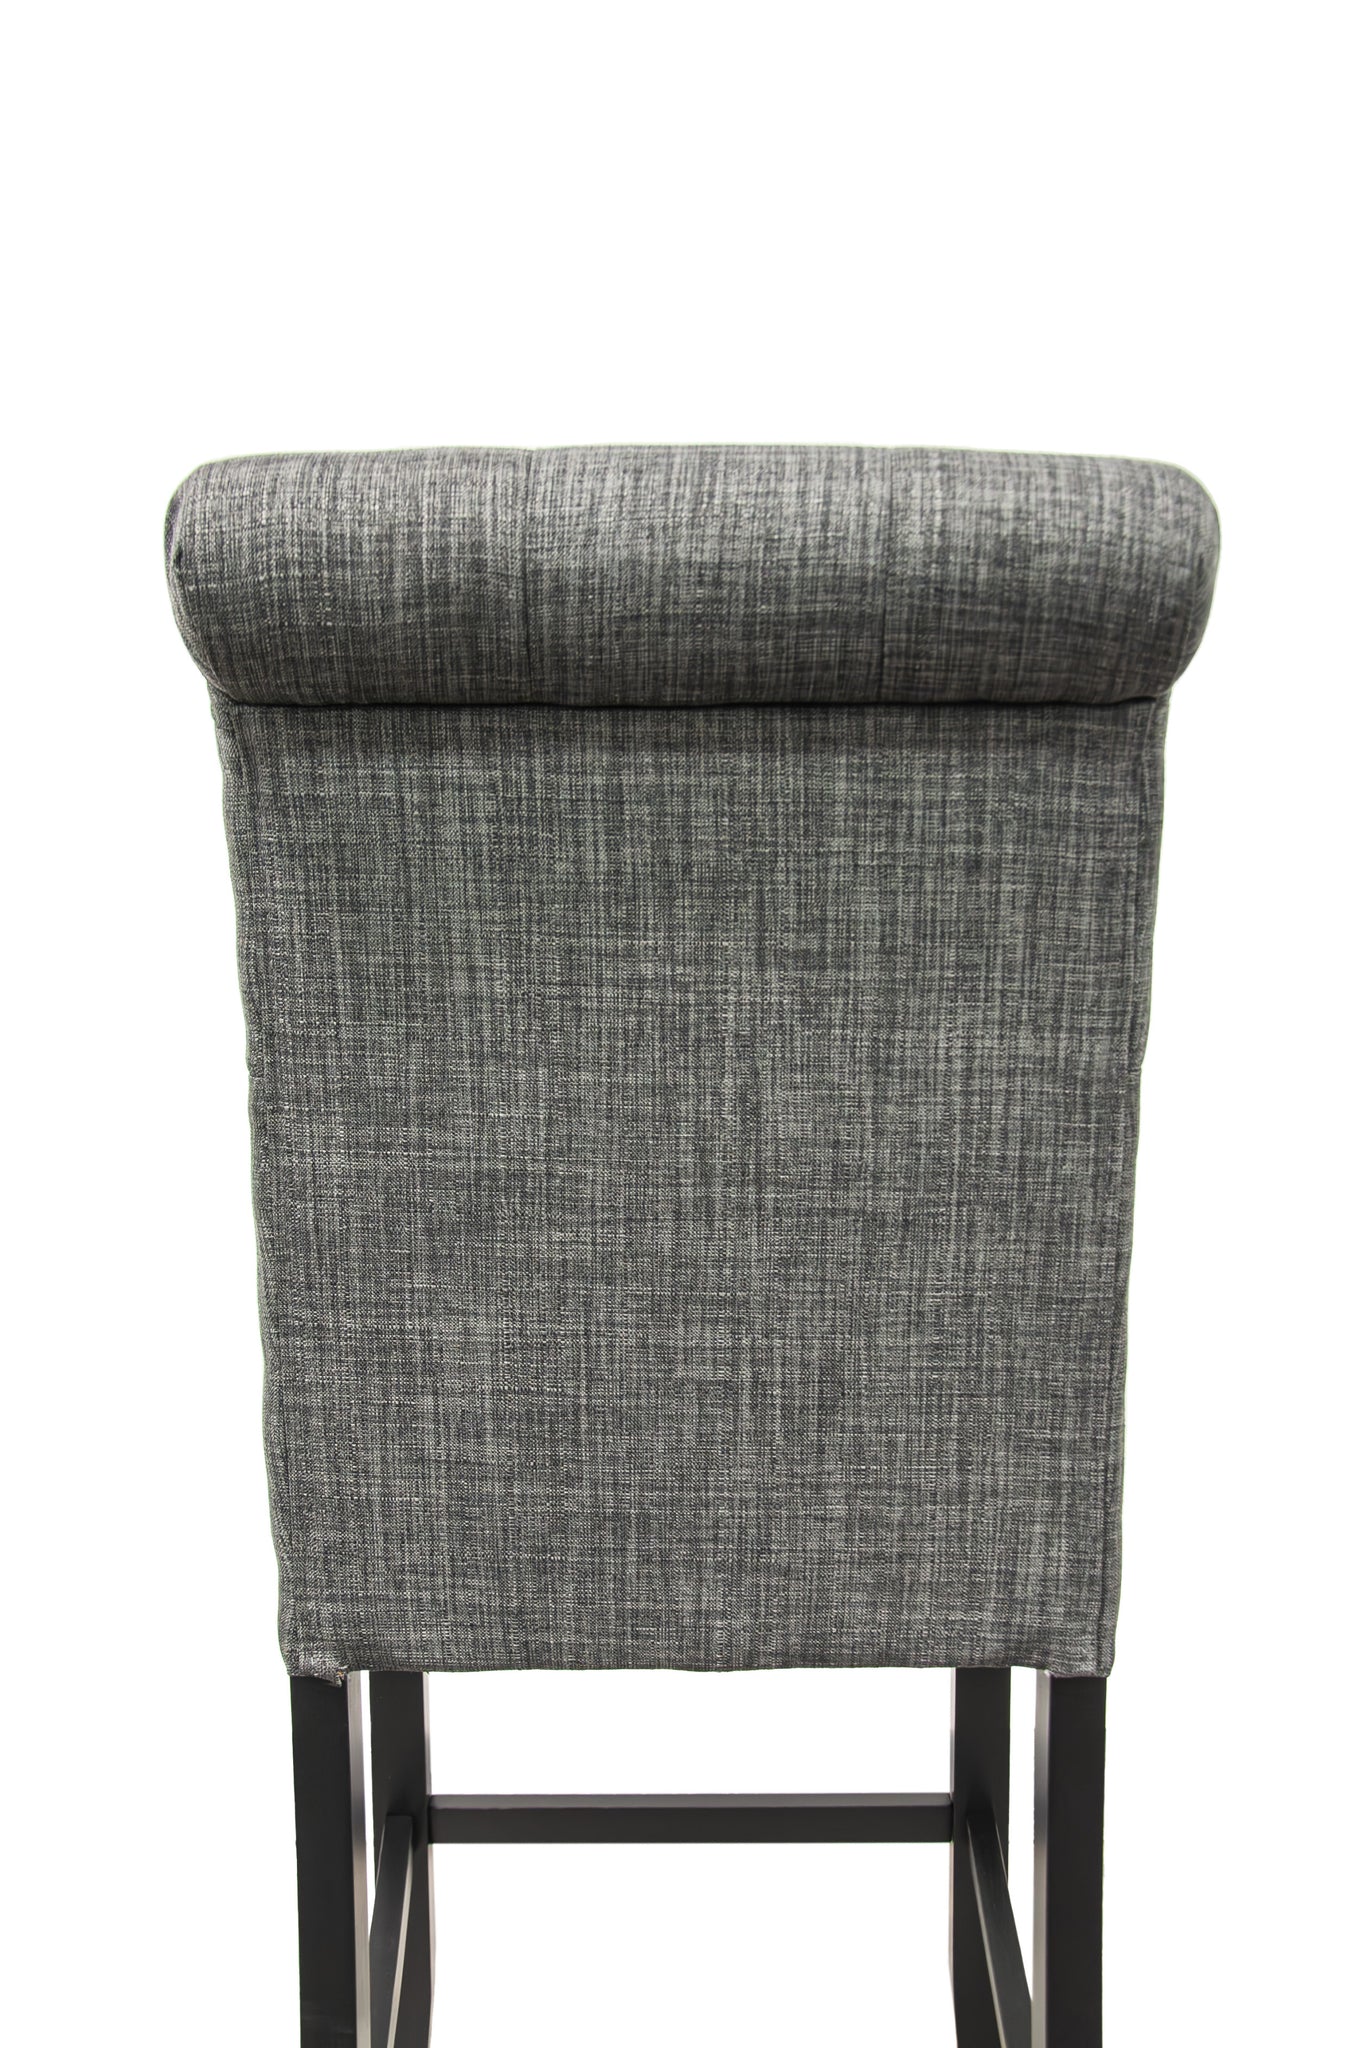 Charcoal Fabric Set of 2pc Counter Height Dining charcoal grey-dining